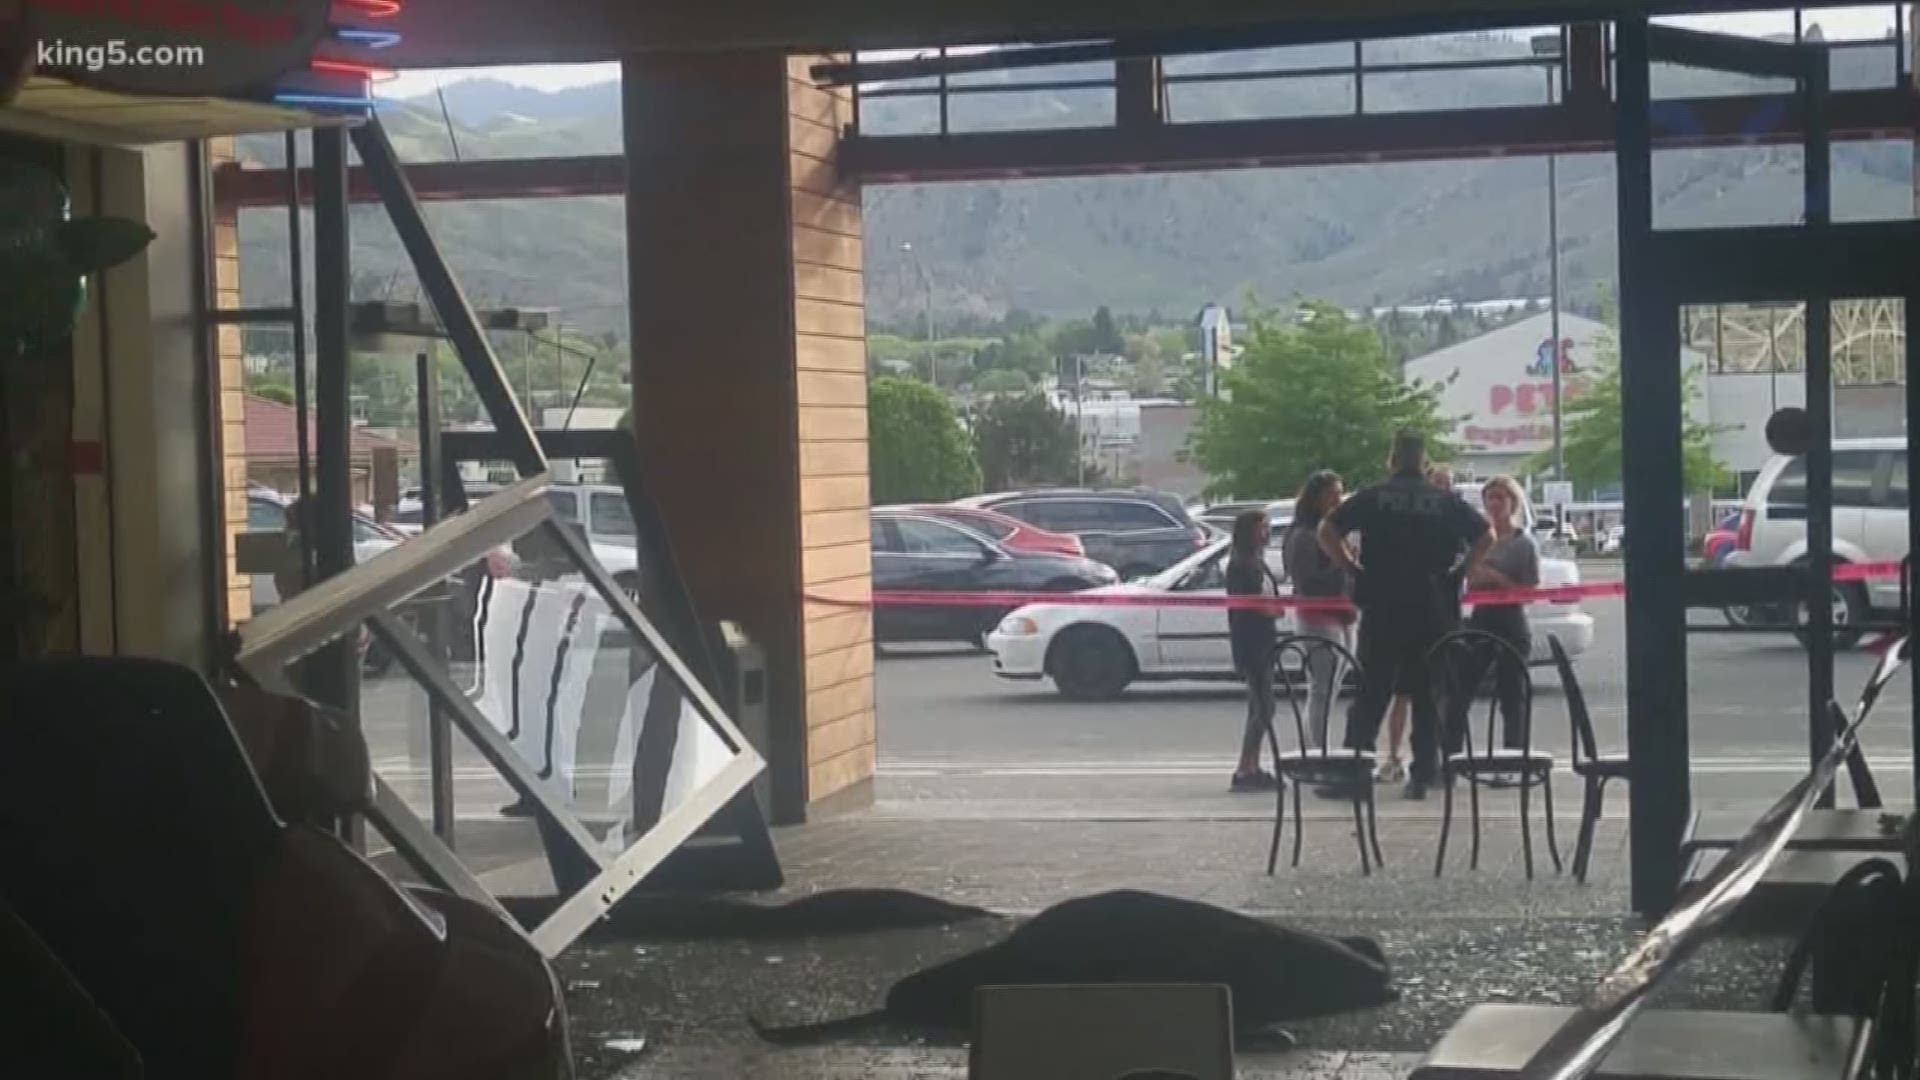 An alleged drunk driver crashed through the front of the Wenatchee Valley Mall Wednesday evening. The driver then drove down the hallway before turning around. Police pulled the vehicle over as it was coming out of the parking lot.